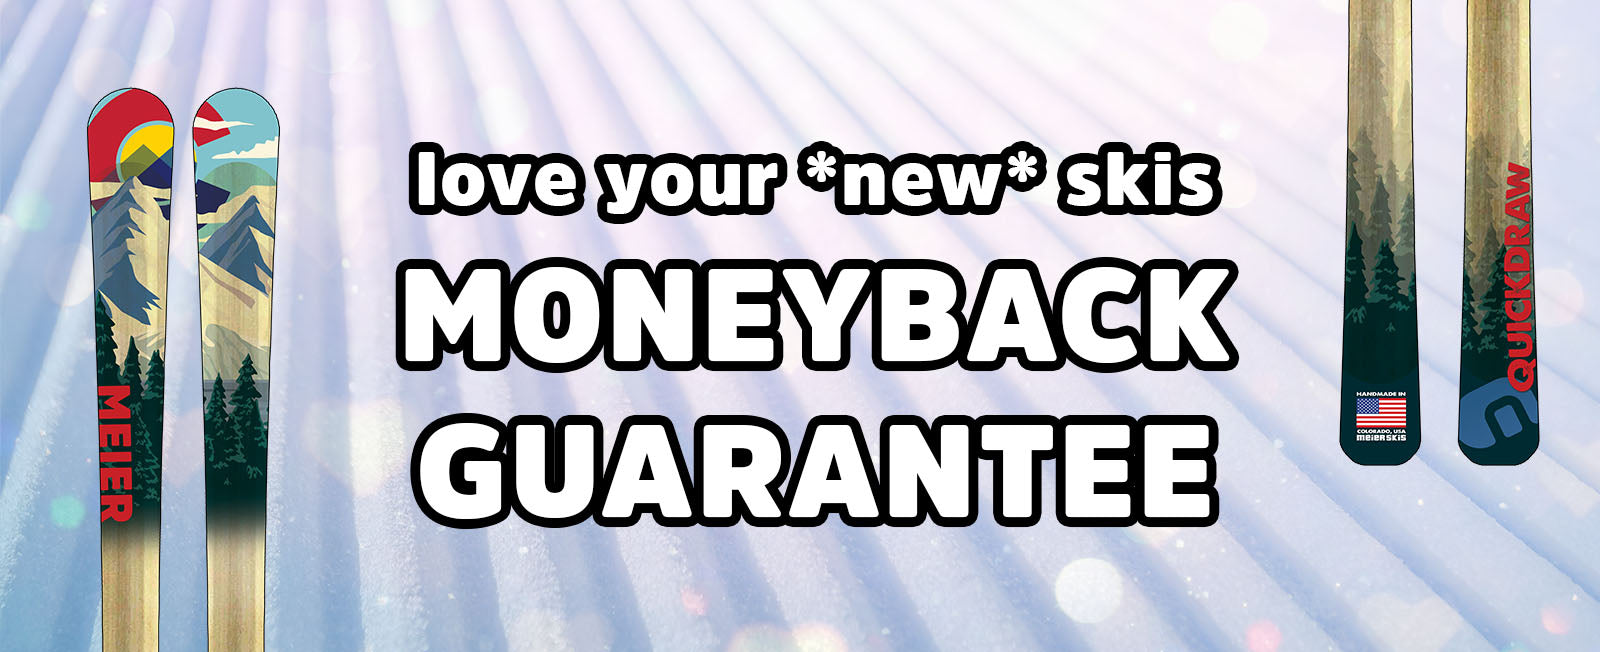 Love your skis moneyback guarantee